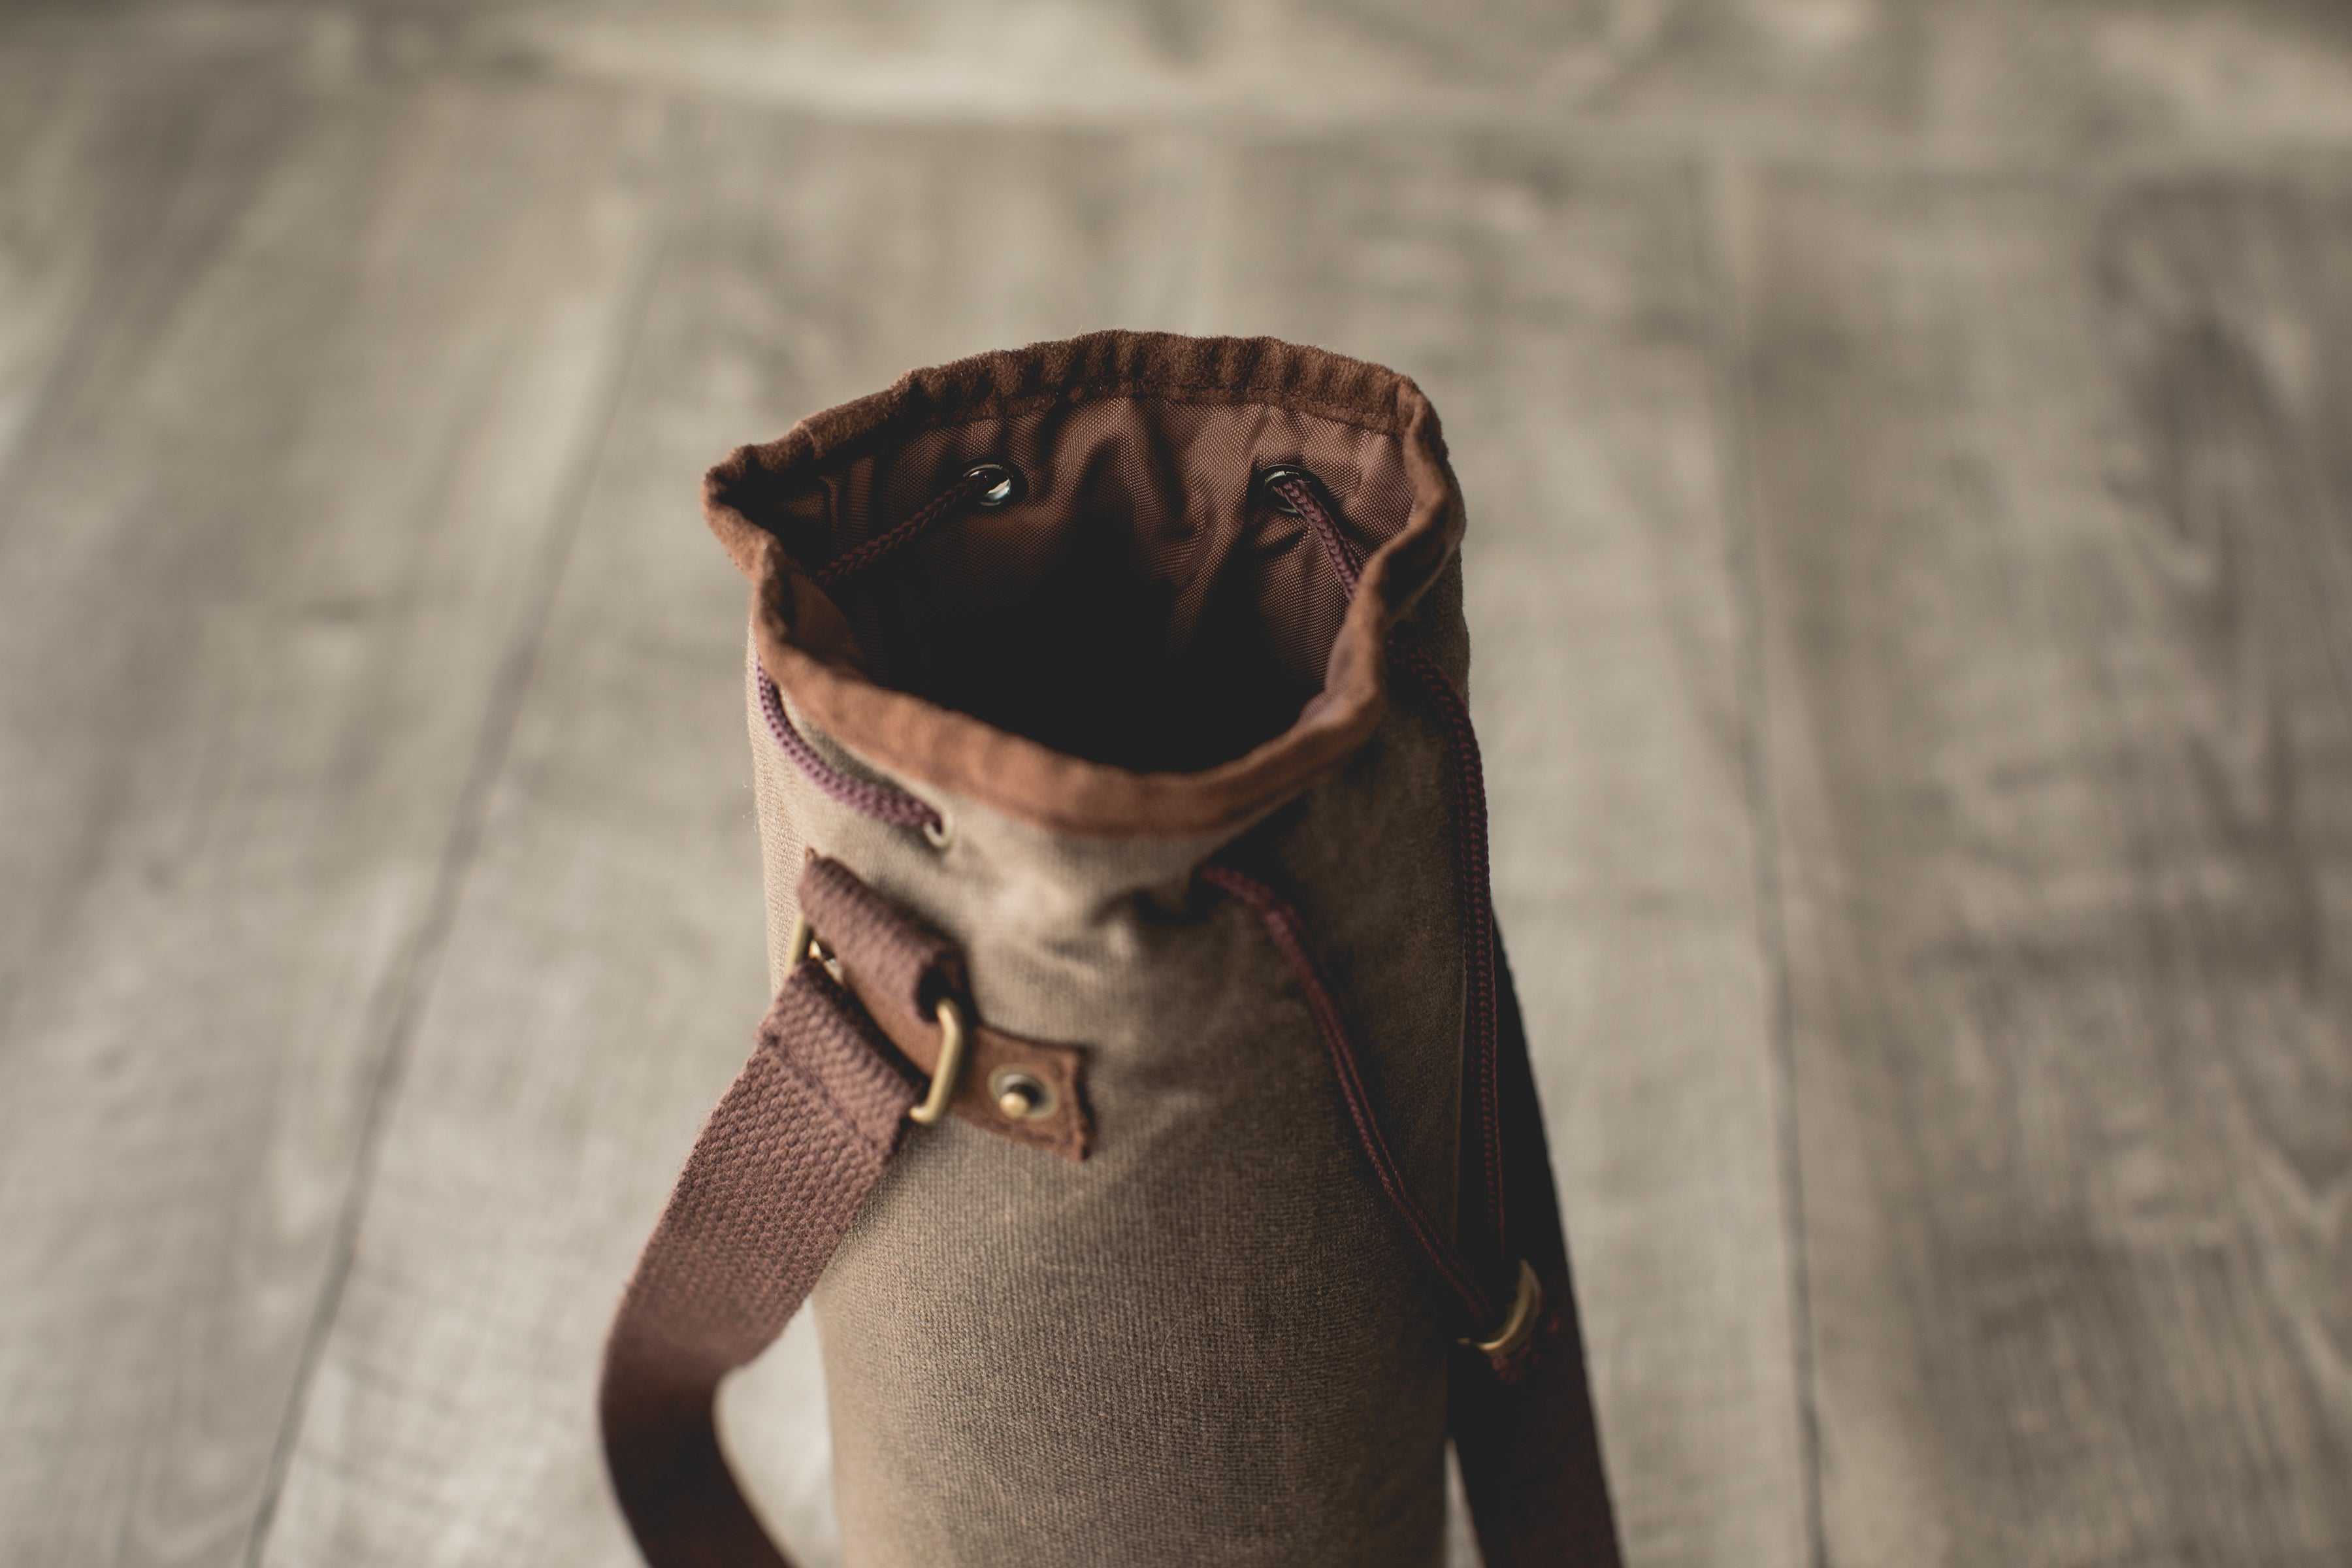 Waxed Canvas Wine Tote